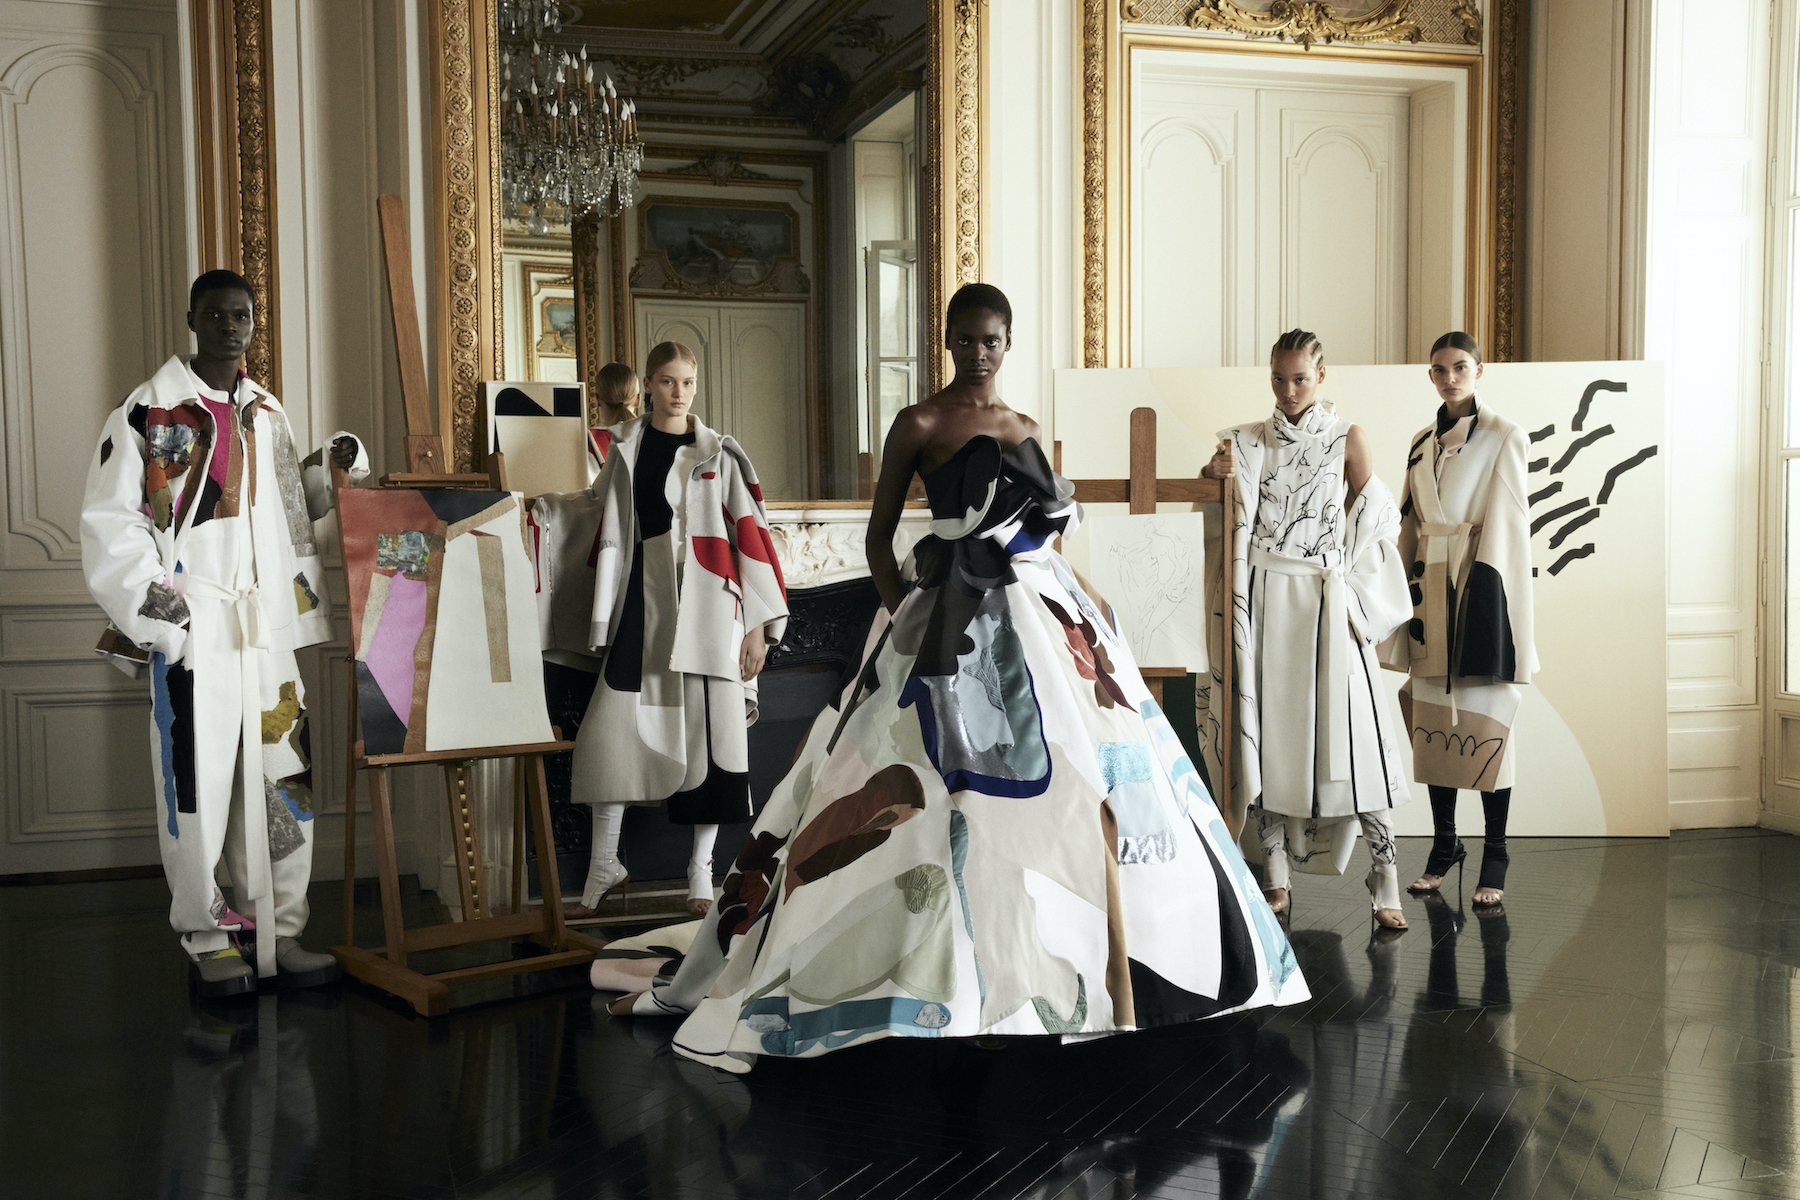  Photography Alvaro Beamud Cortês, Fashion Gro Curtis | Mamadou, Nathalie, Marie, Sculy, and Typhanie wear all clothing and accessories Valentino Haute Couture /// Artwork from left to right: “Untitled 2018” by Francis Offman / “1561” by Katrin Bremermann / “Disegno 60 per 60 - 3” by Benni Bosetto, “Vulcano” by Malte Zenses / Center gown inspired by, but not pictured: “La Roda, 2017” by Patricia Trieb